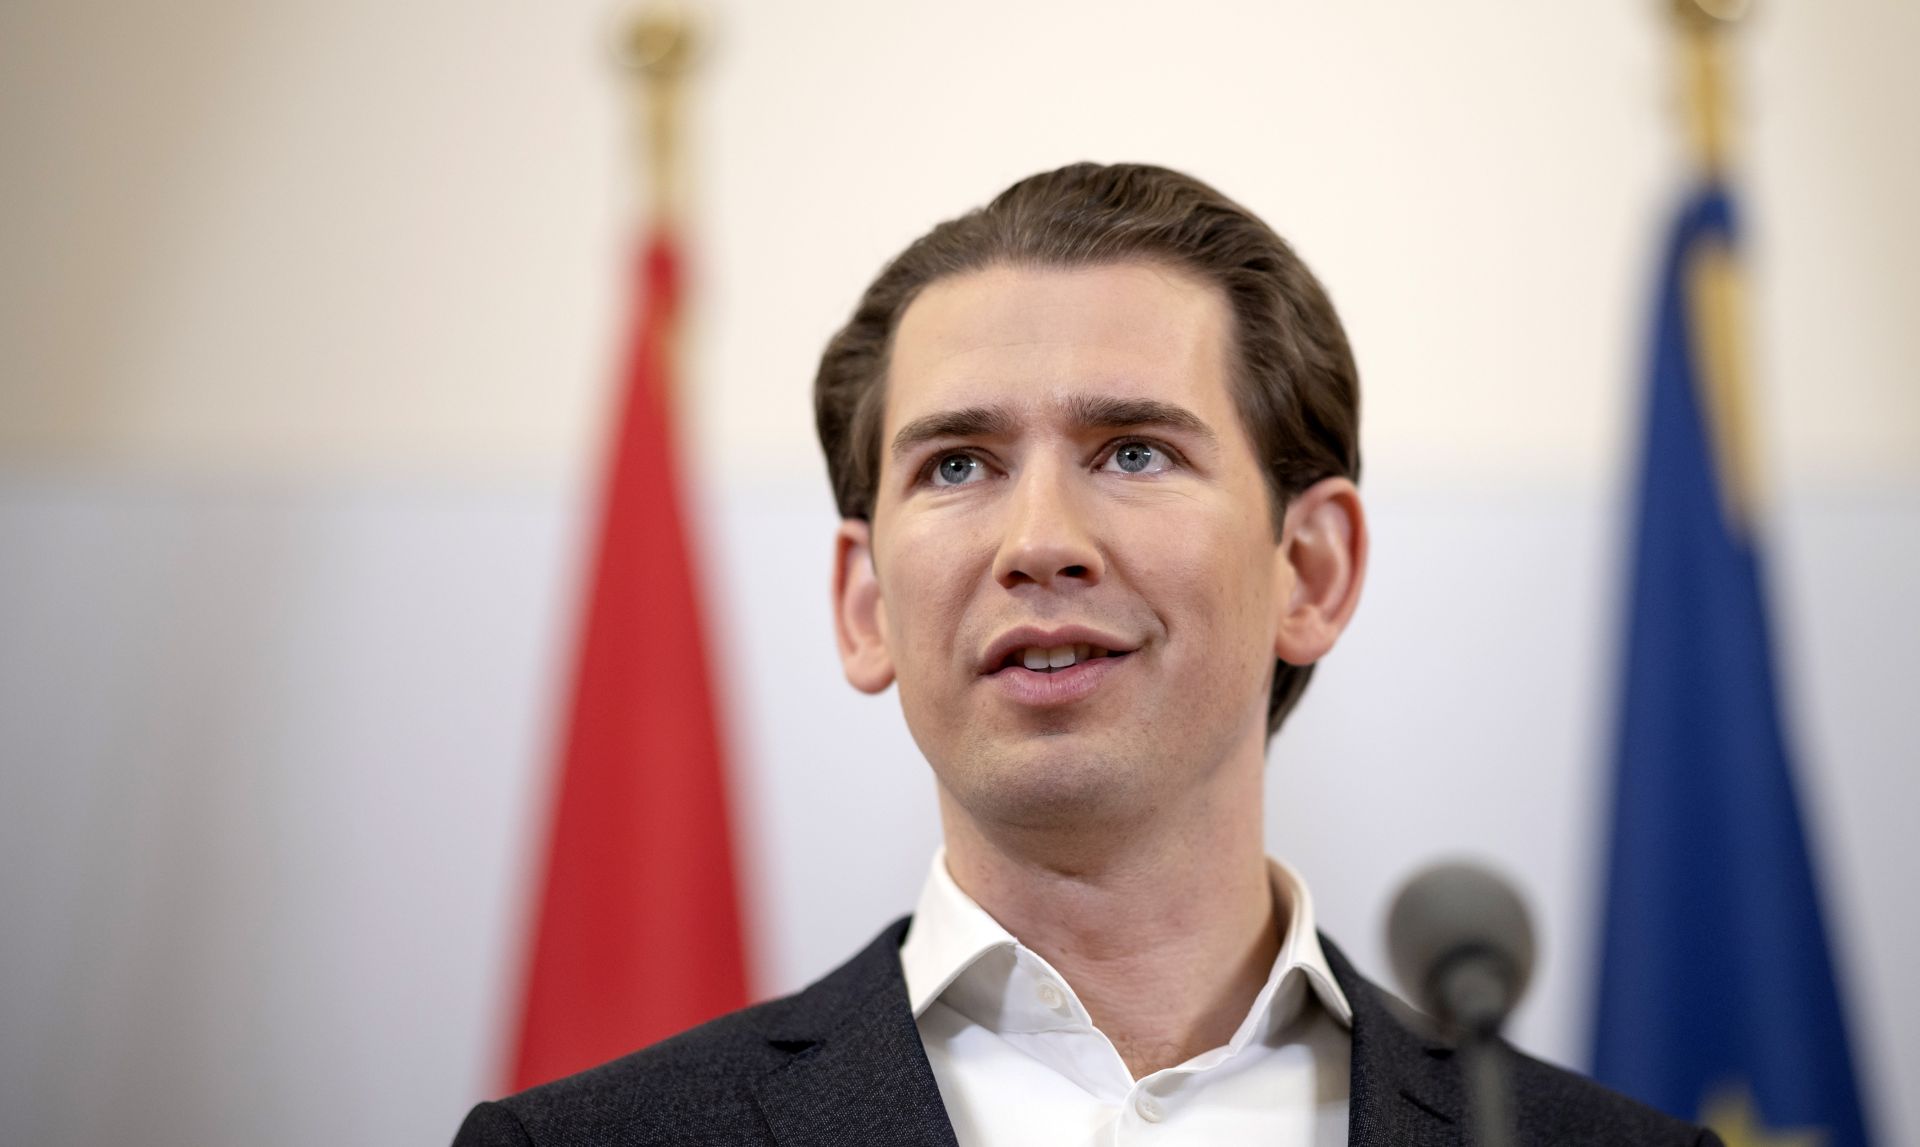 epa08091808 Leader of Austrian People's Party (OeVP), Sebastian Kurz delivers a press statement next to his team during coalition negotiations with the Green Party for a new Austrian government at the Winter Palace of Prince Eugene in Vienna, Austria, 27 December 2019. Austrian President Alexander Van der Bellen gave Kurz a mandate to build a new coalition government on 07 October 2019.  EPA/CHRISTIAN BRUNA